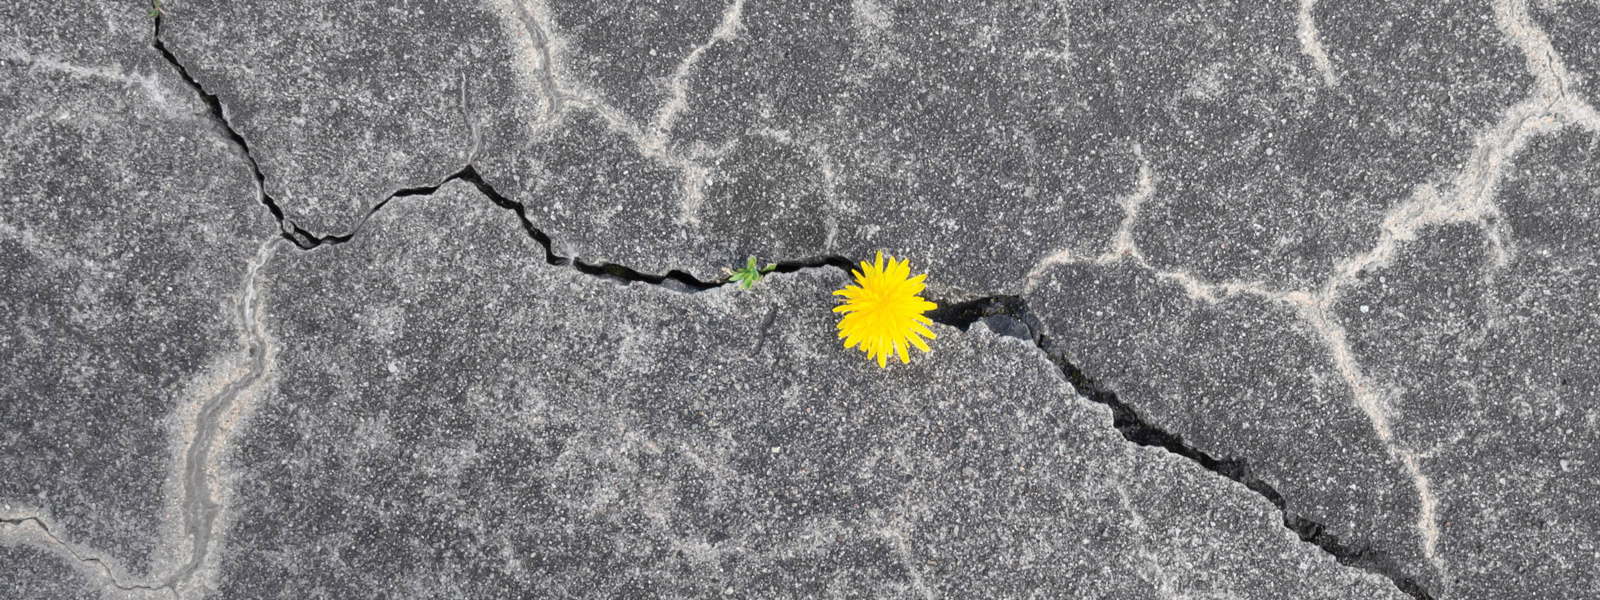 yellow flower growing in crack in concrete